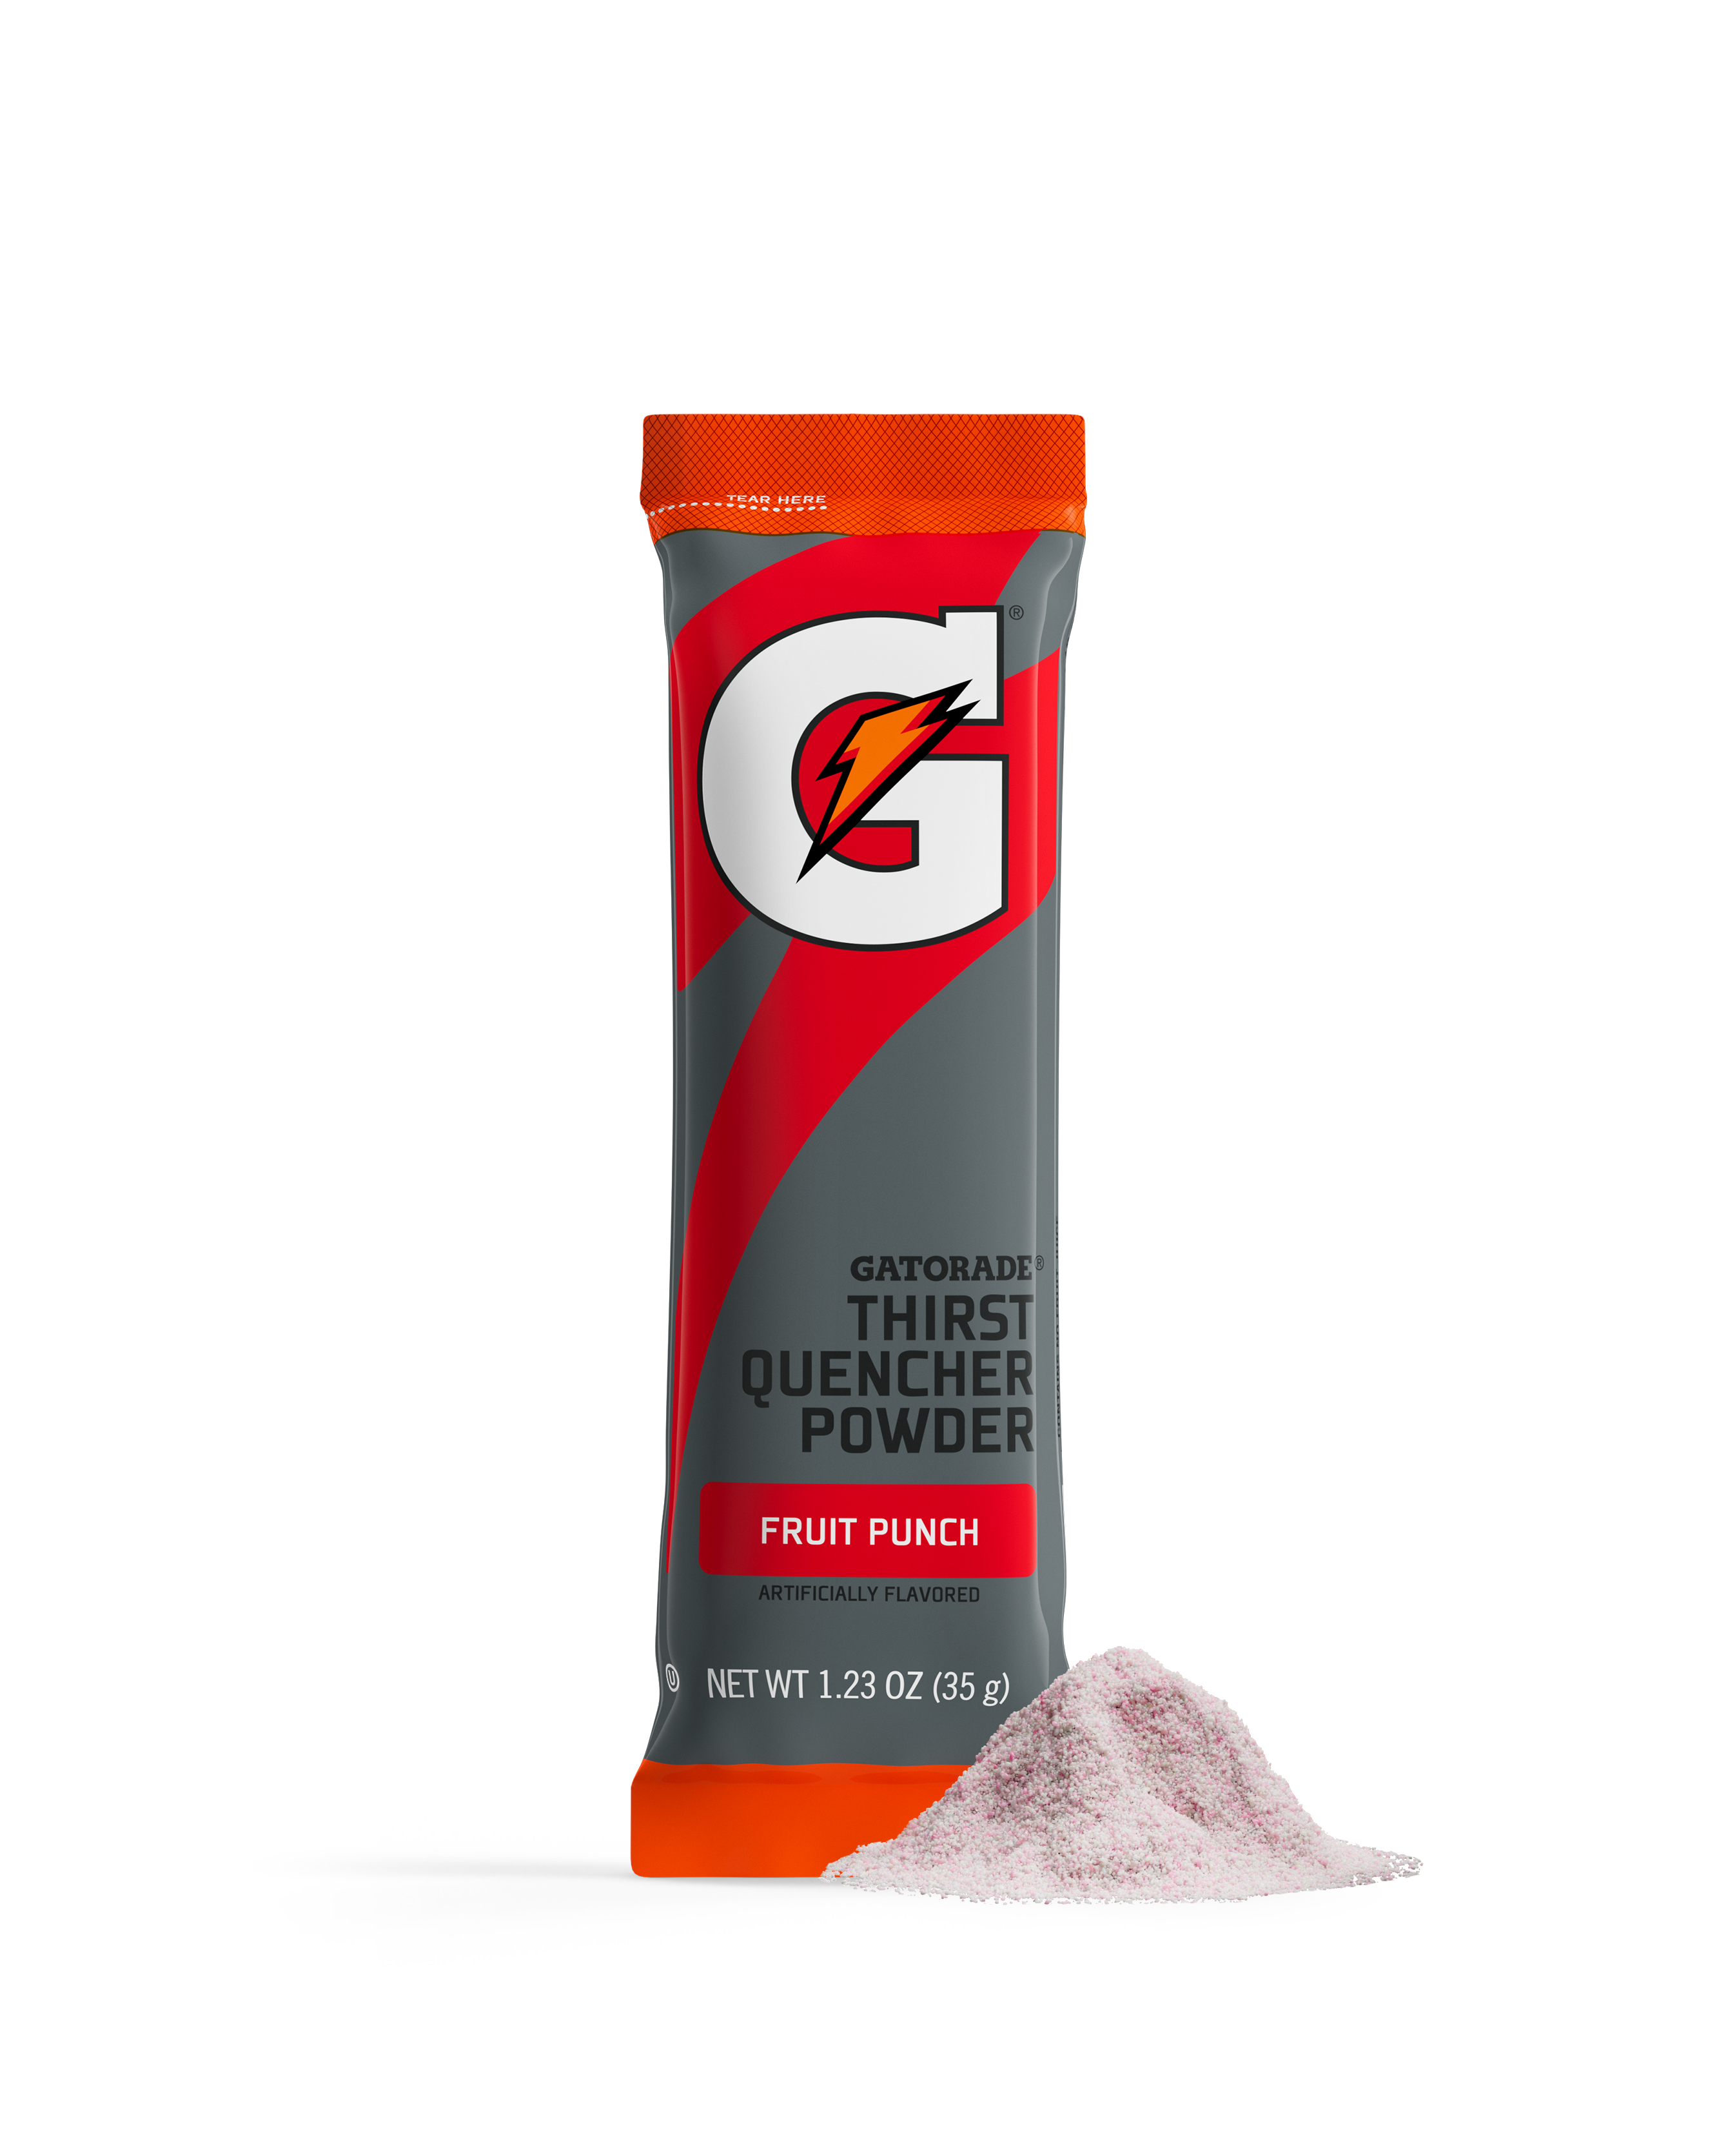 Gatorade Thirst Quencher Single Serve Powder Fruit Punch Product Tile